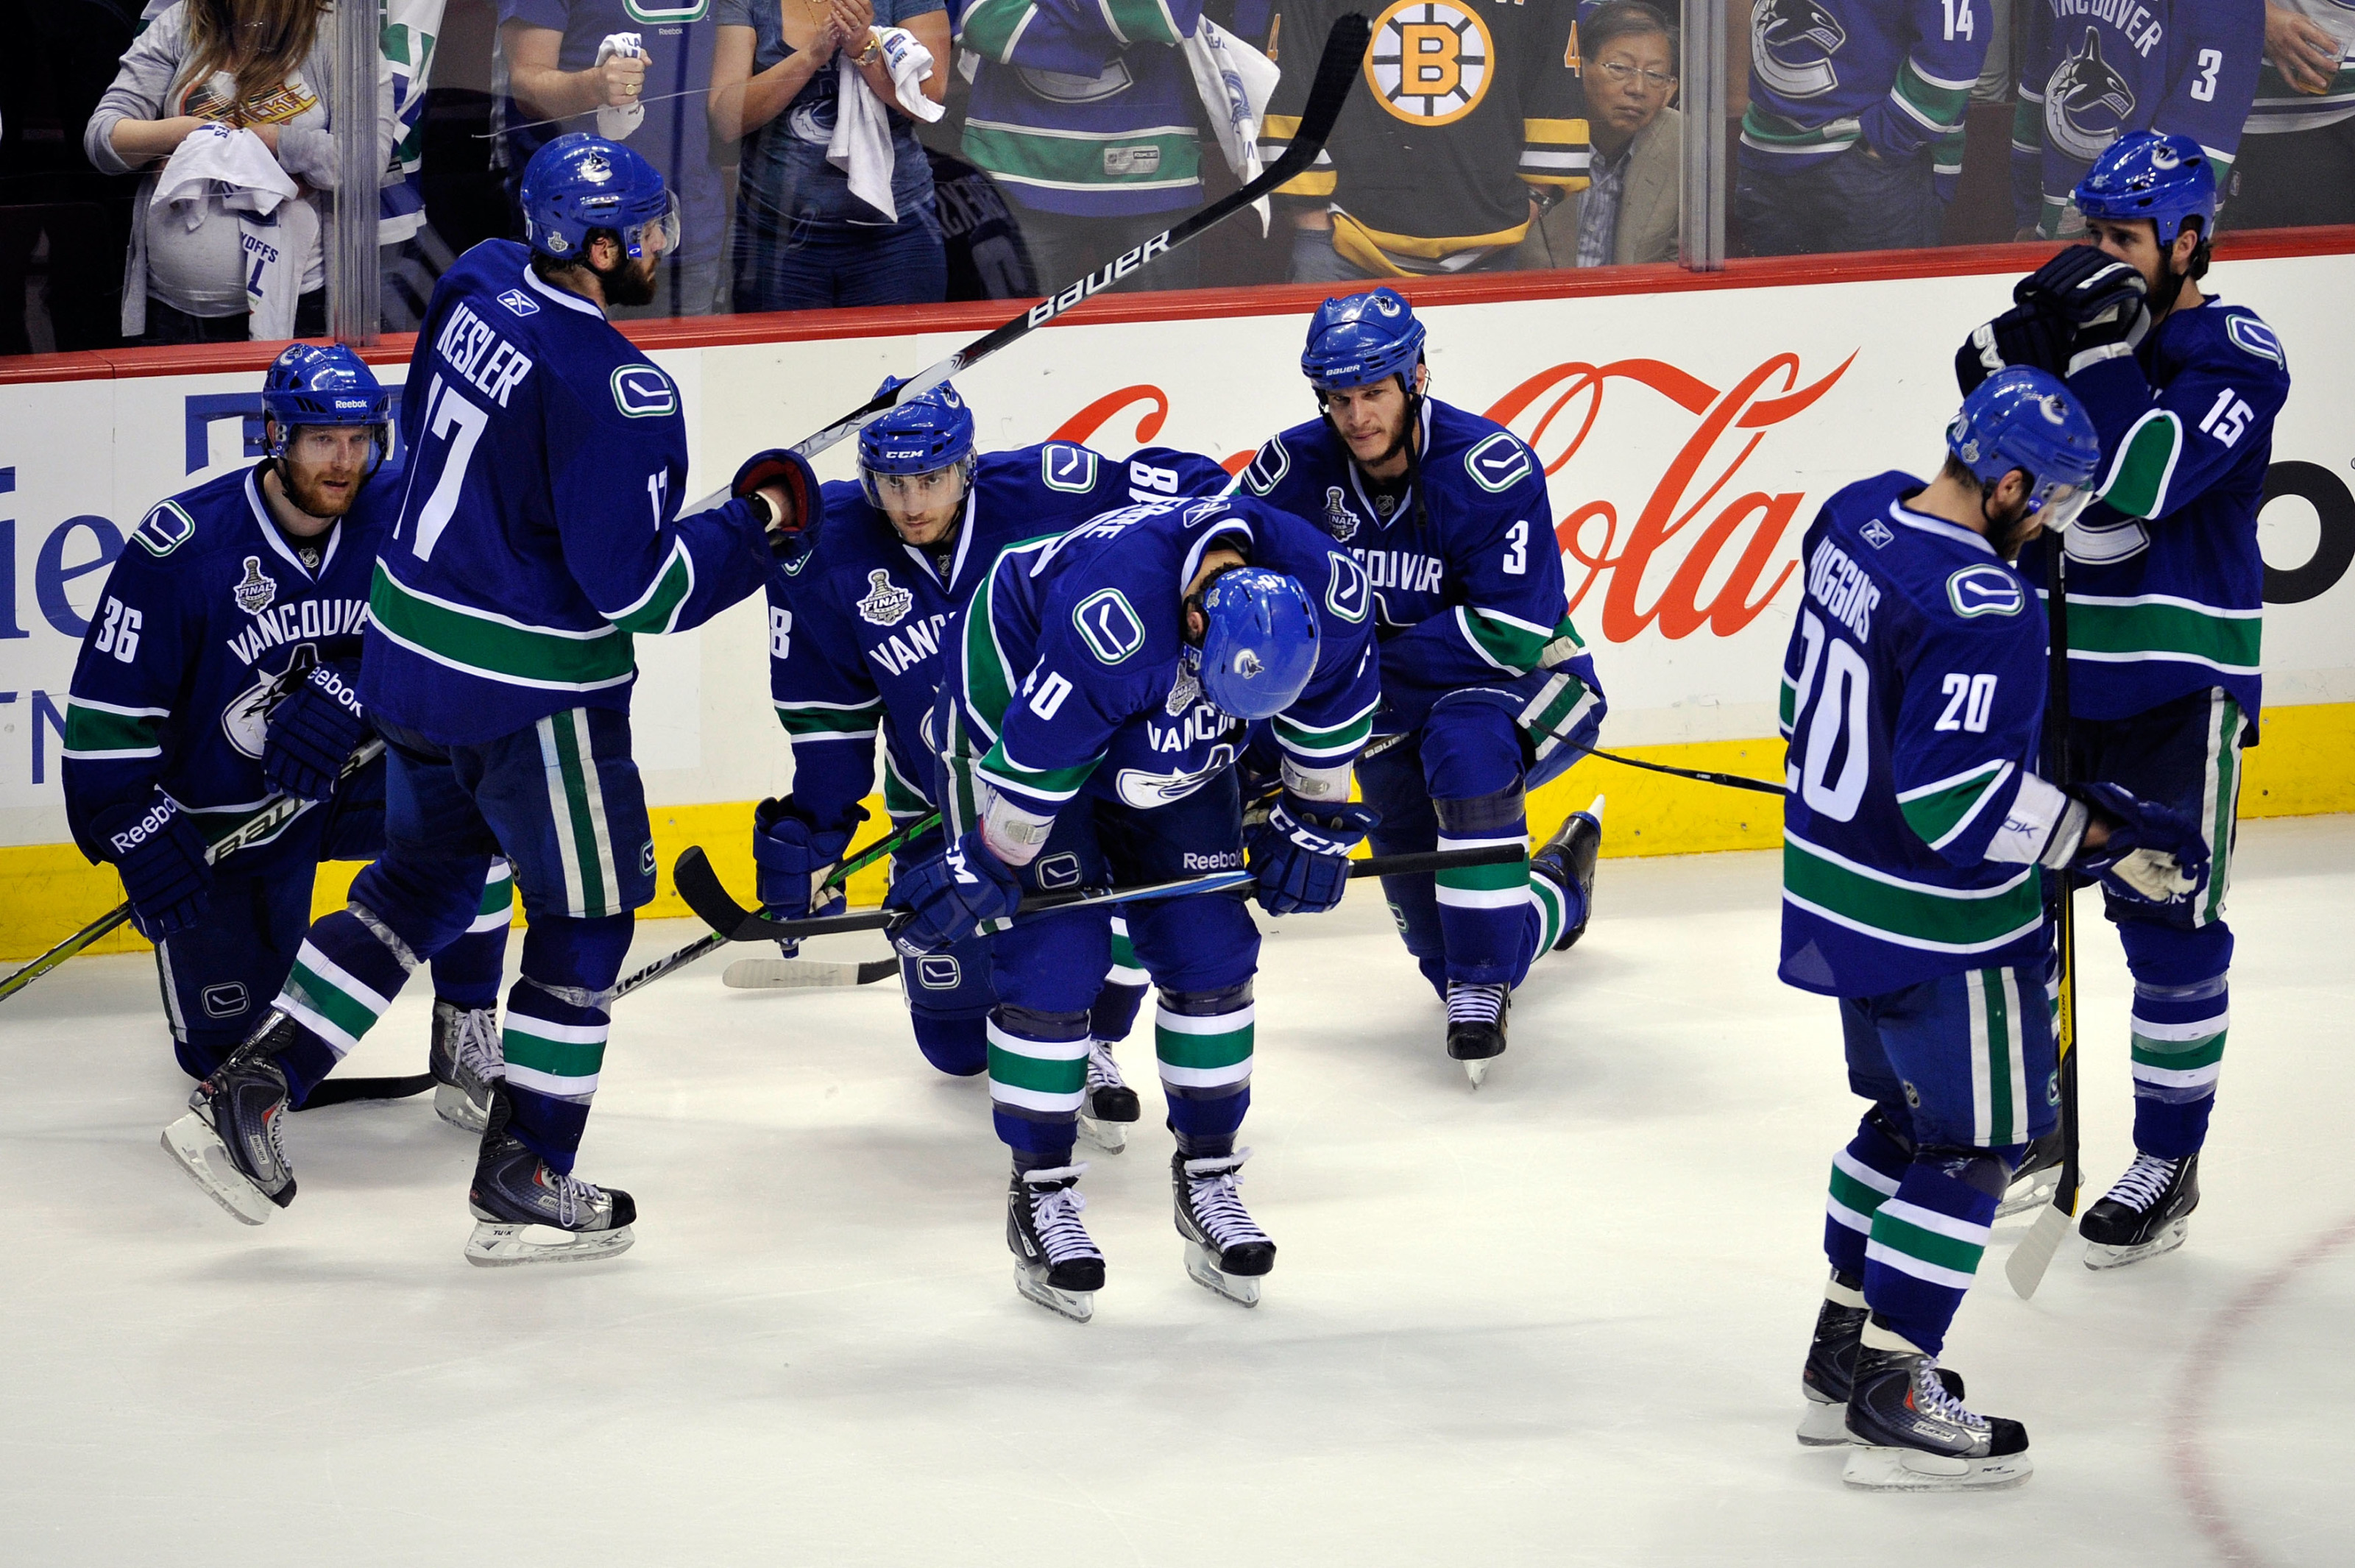 State of the Stanley Cup drought: How close are the Canucks to winning?